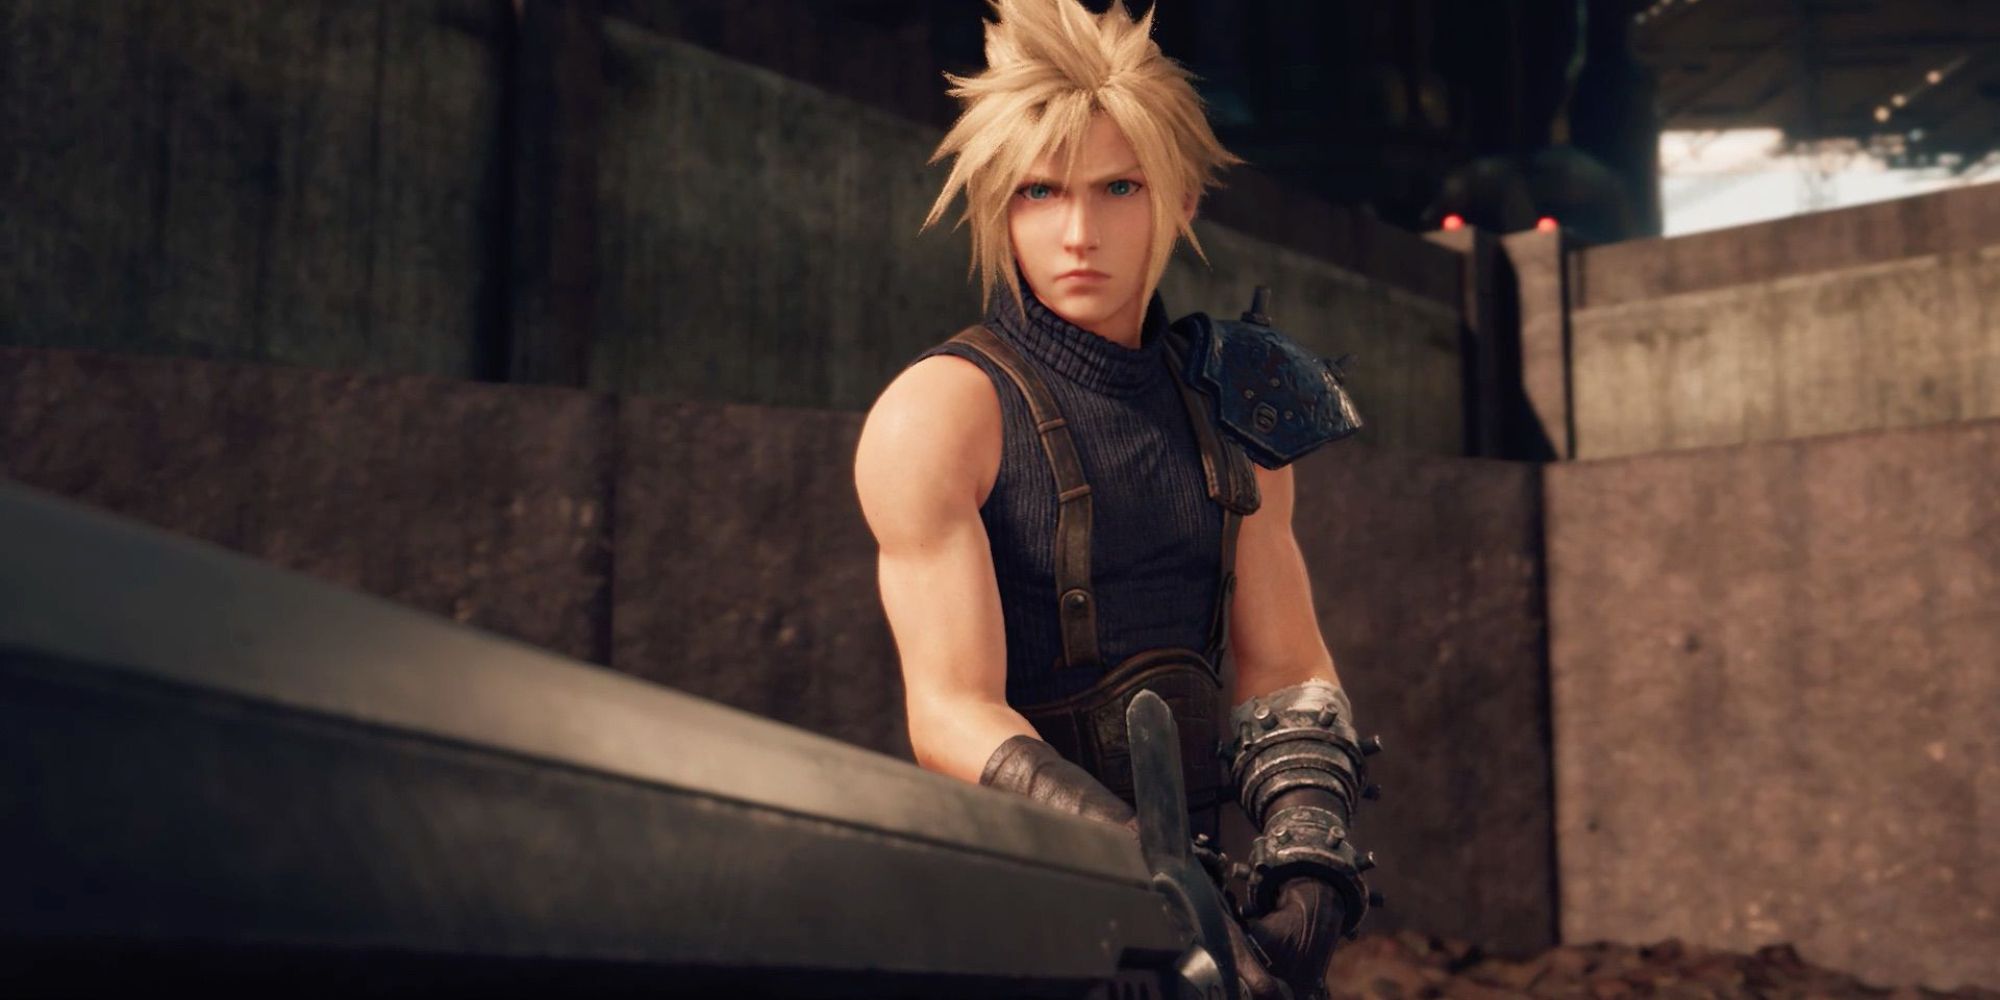 Cloud from Final Fantasy 7 Remake